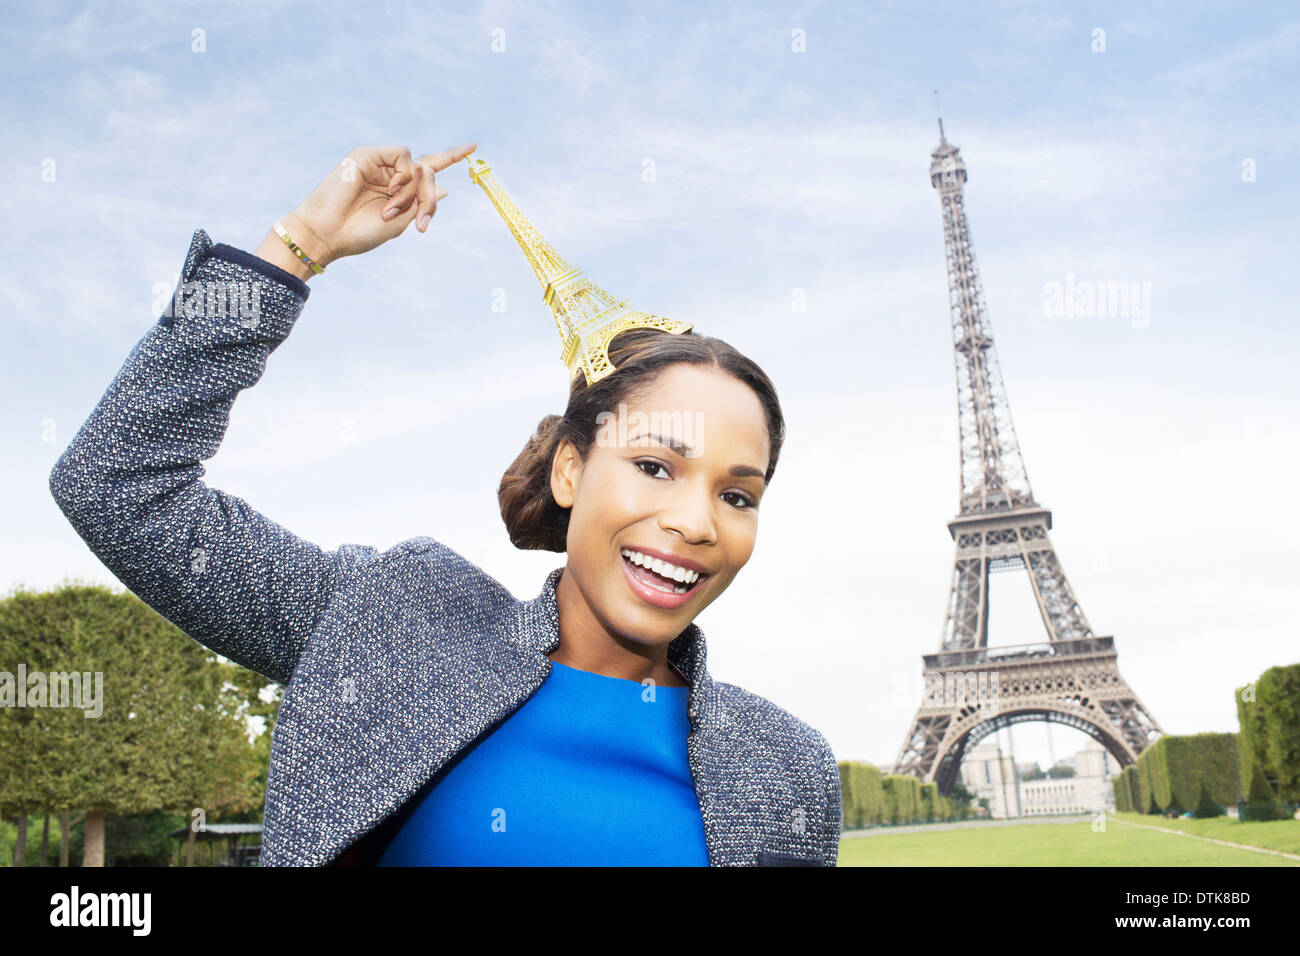 Woman posing with souvenir in front of Eiffel Tower, Paris, France Stock Photo